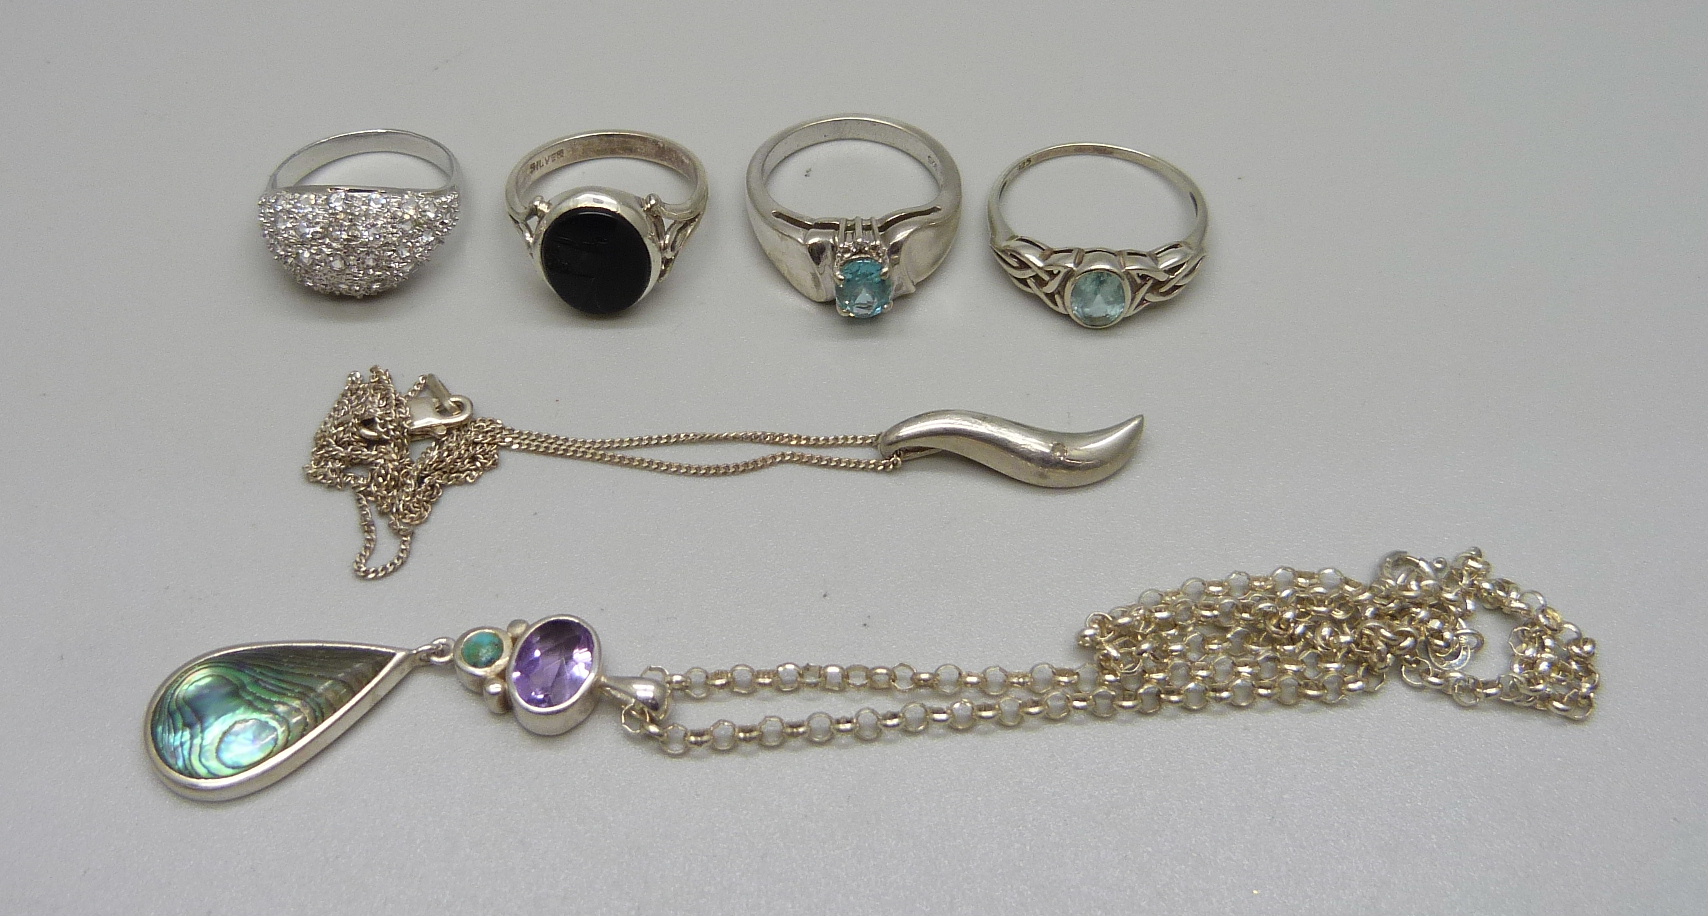 Four silver rings and two silver pendants and chains